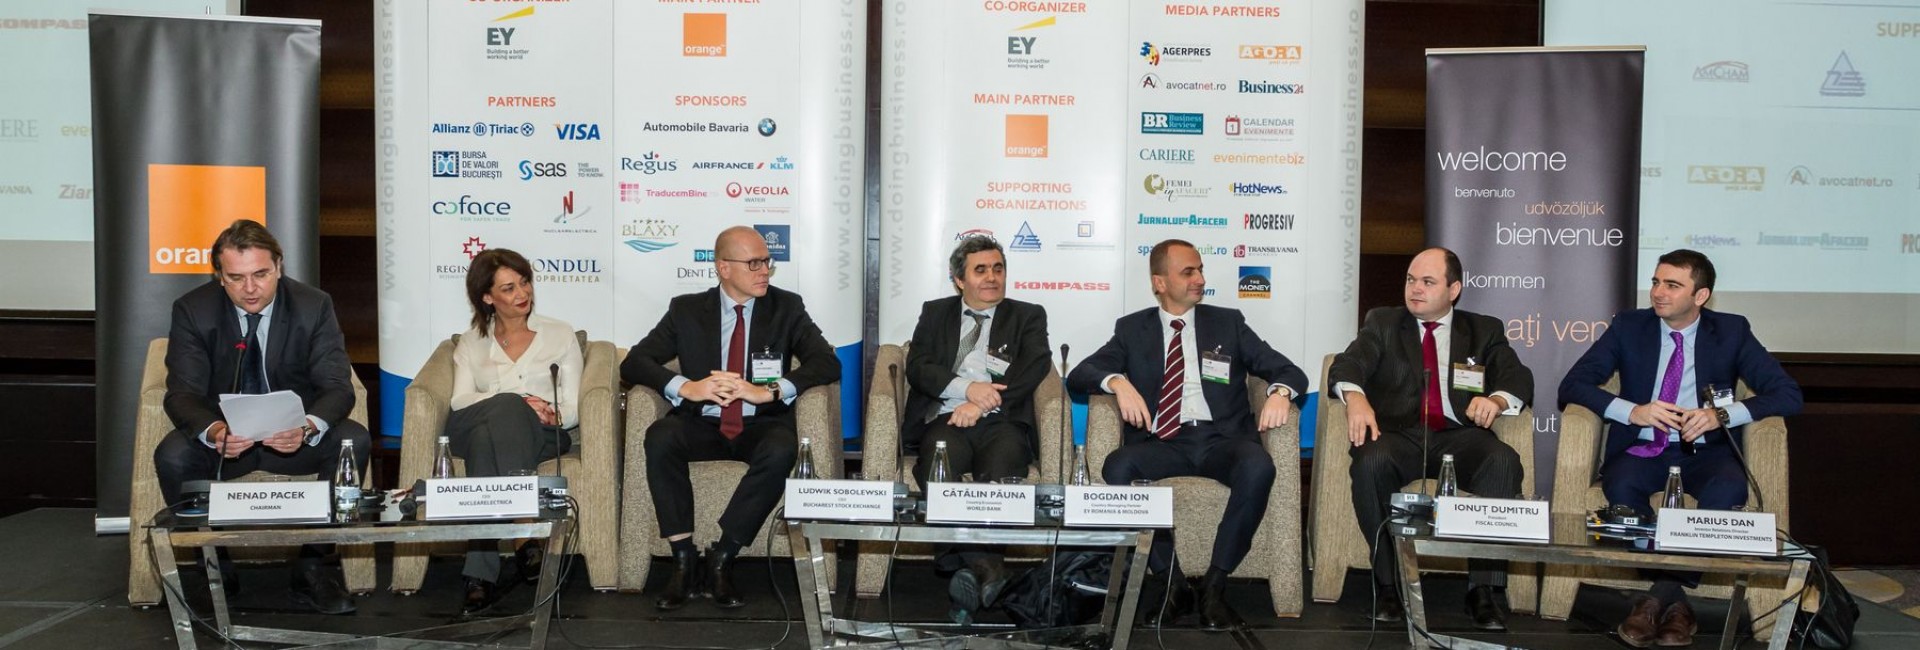 CEO Conference - Shaping the Future, Bucharest, 2015